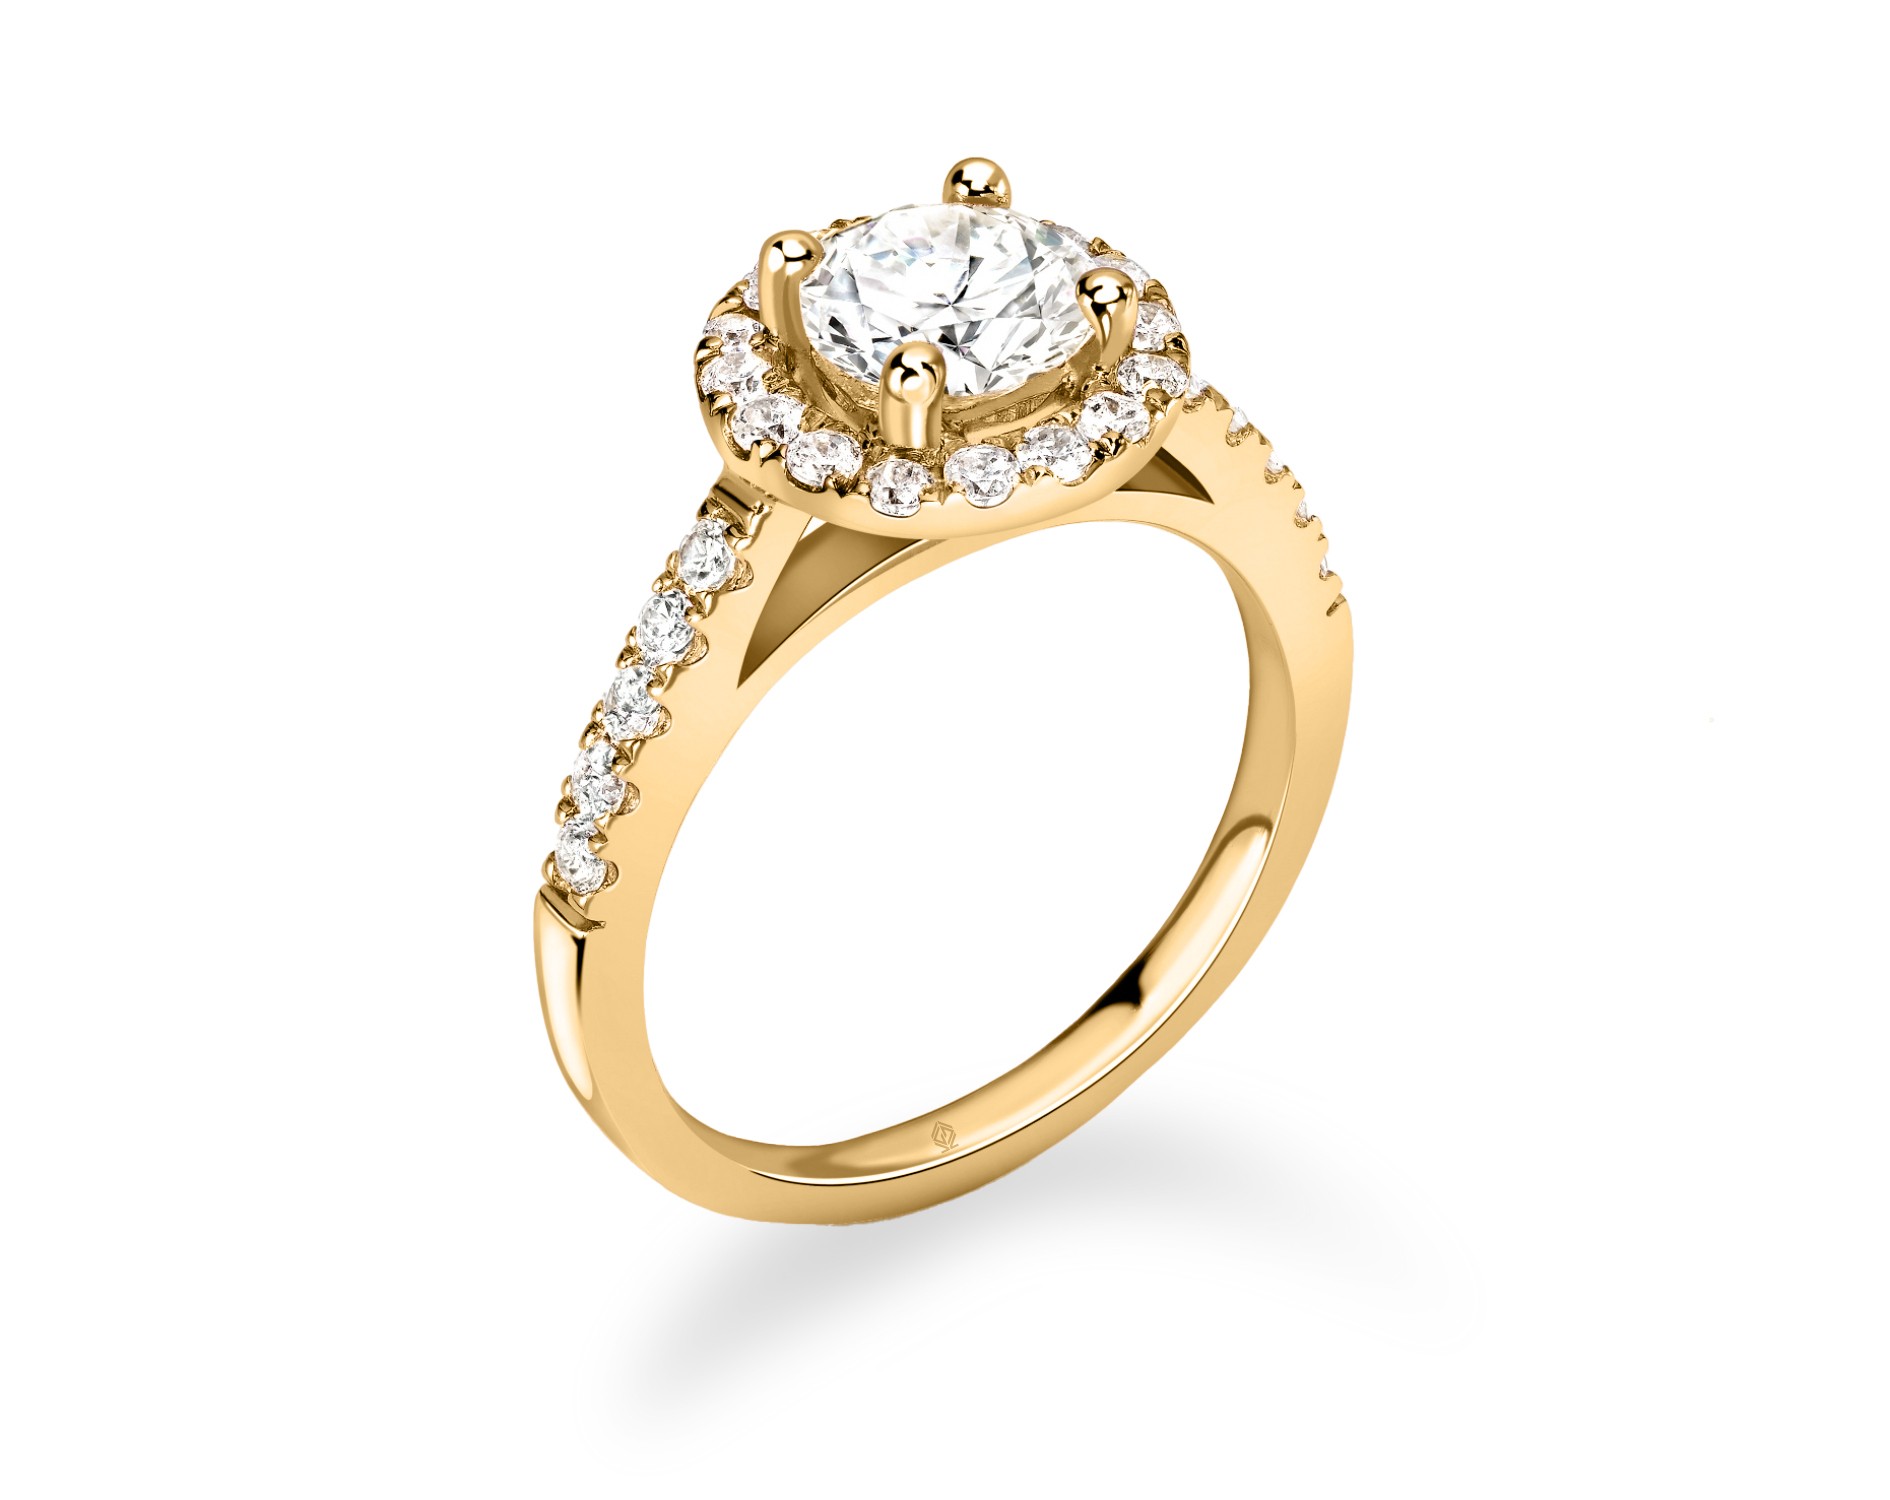 18K YELLOW GOLD 4 PRONGS HALO ROUND CUT DIAMOND ENGAGEMENT RING WITH SIDE STONES PAVE SET